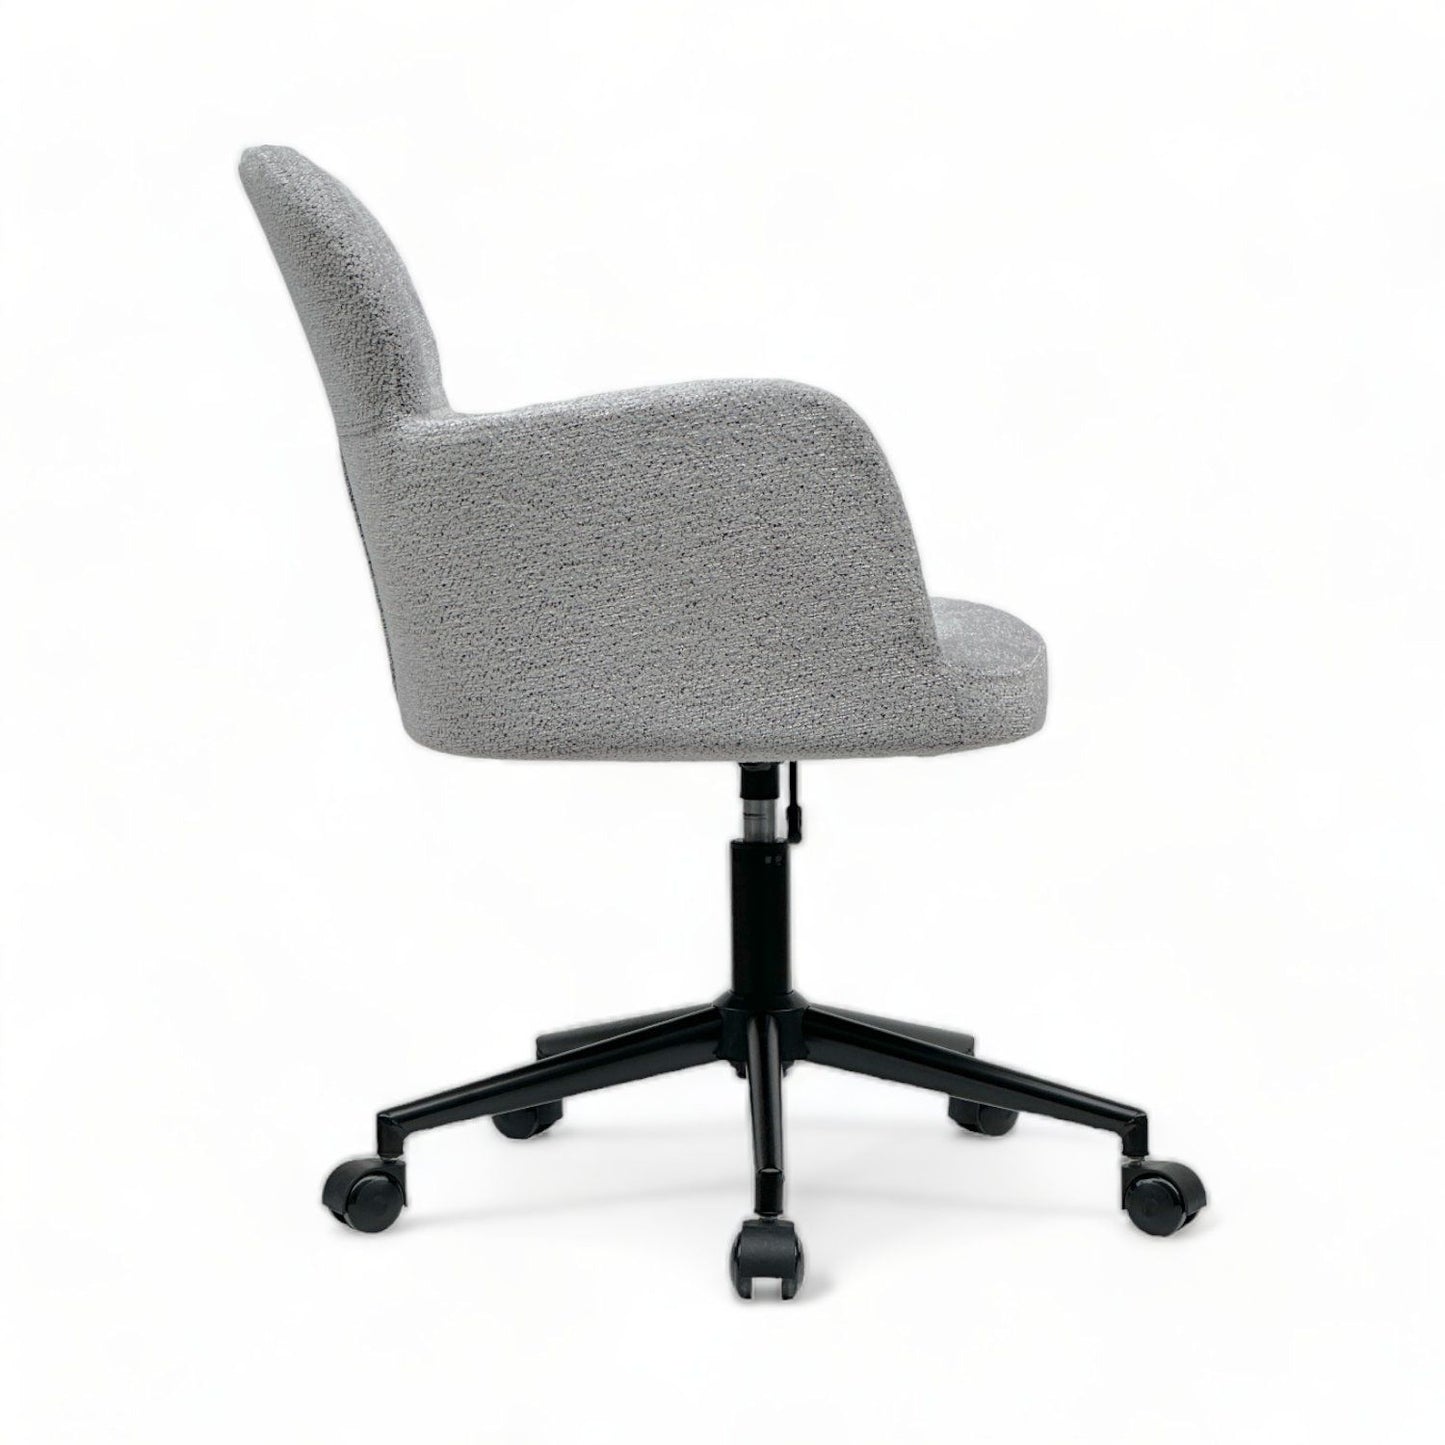 Roll - White - Office Chair